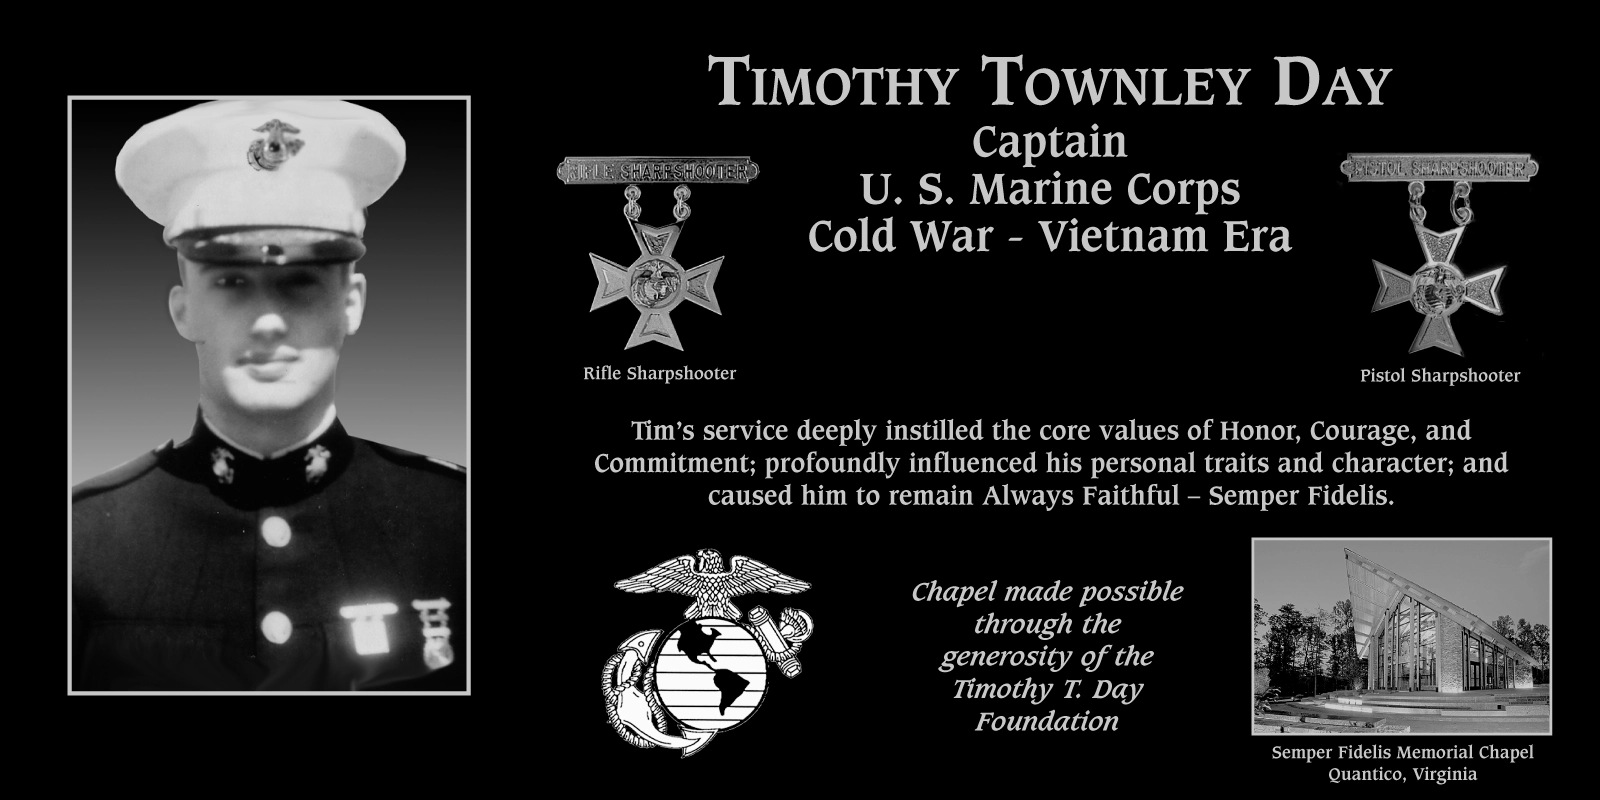 Timothy Townley “Tim” Day